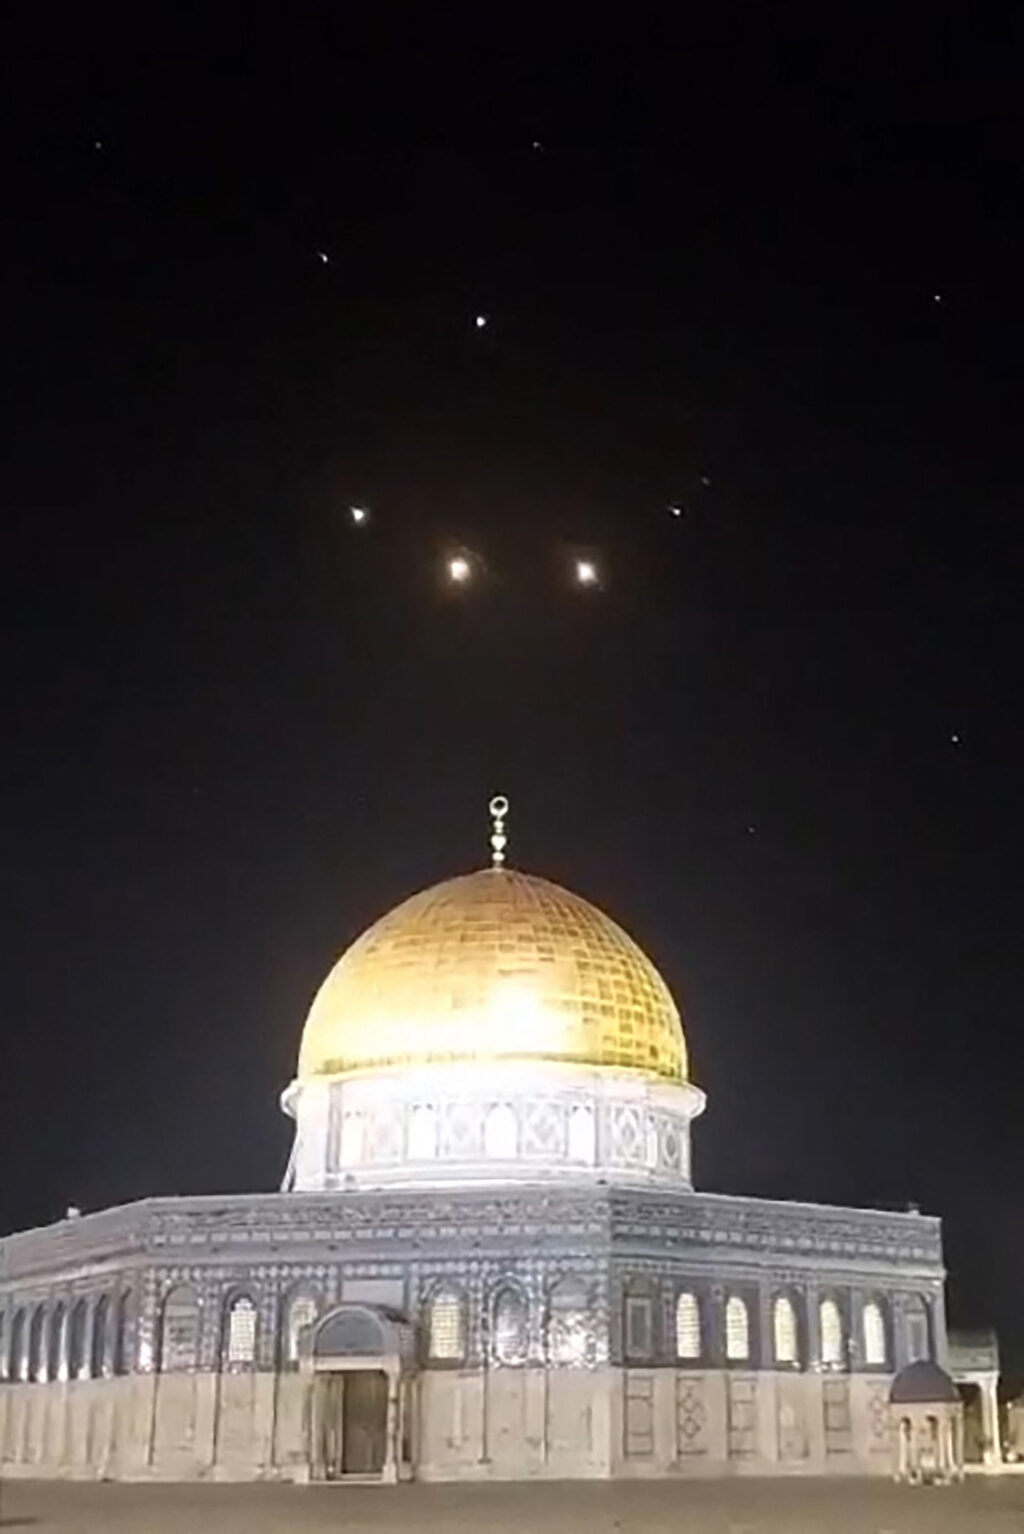 Iran attack on Israel: Why? Key events leading to military assault: An image-grab from a video taken early on April 14, 2024, shows rocket trails in the sky above the Al-Aqsa Mosque compound in Jerusalem. Iran launched its first-ever direct attack on Israeli territory late on April 13, marking a major escalation of the long-running covert war between the regional foes and sparking fears of a broader conflict breaking out. | AFP